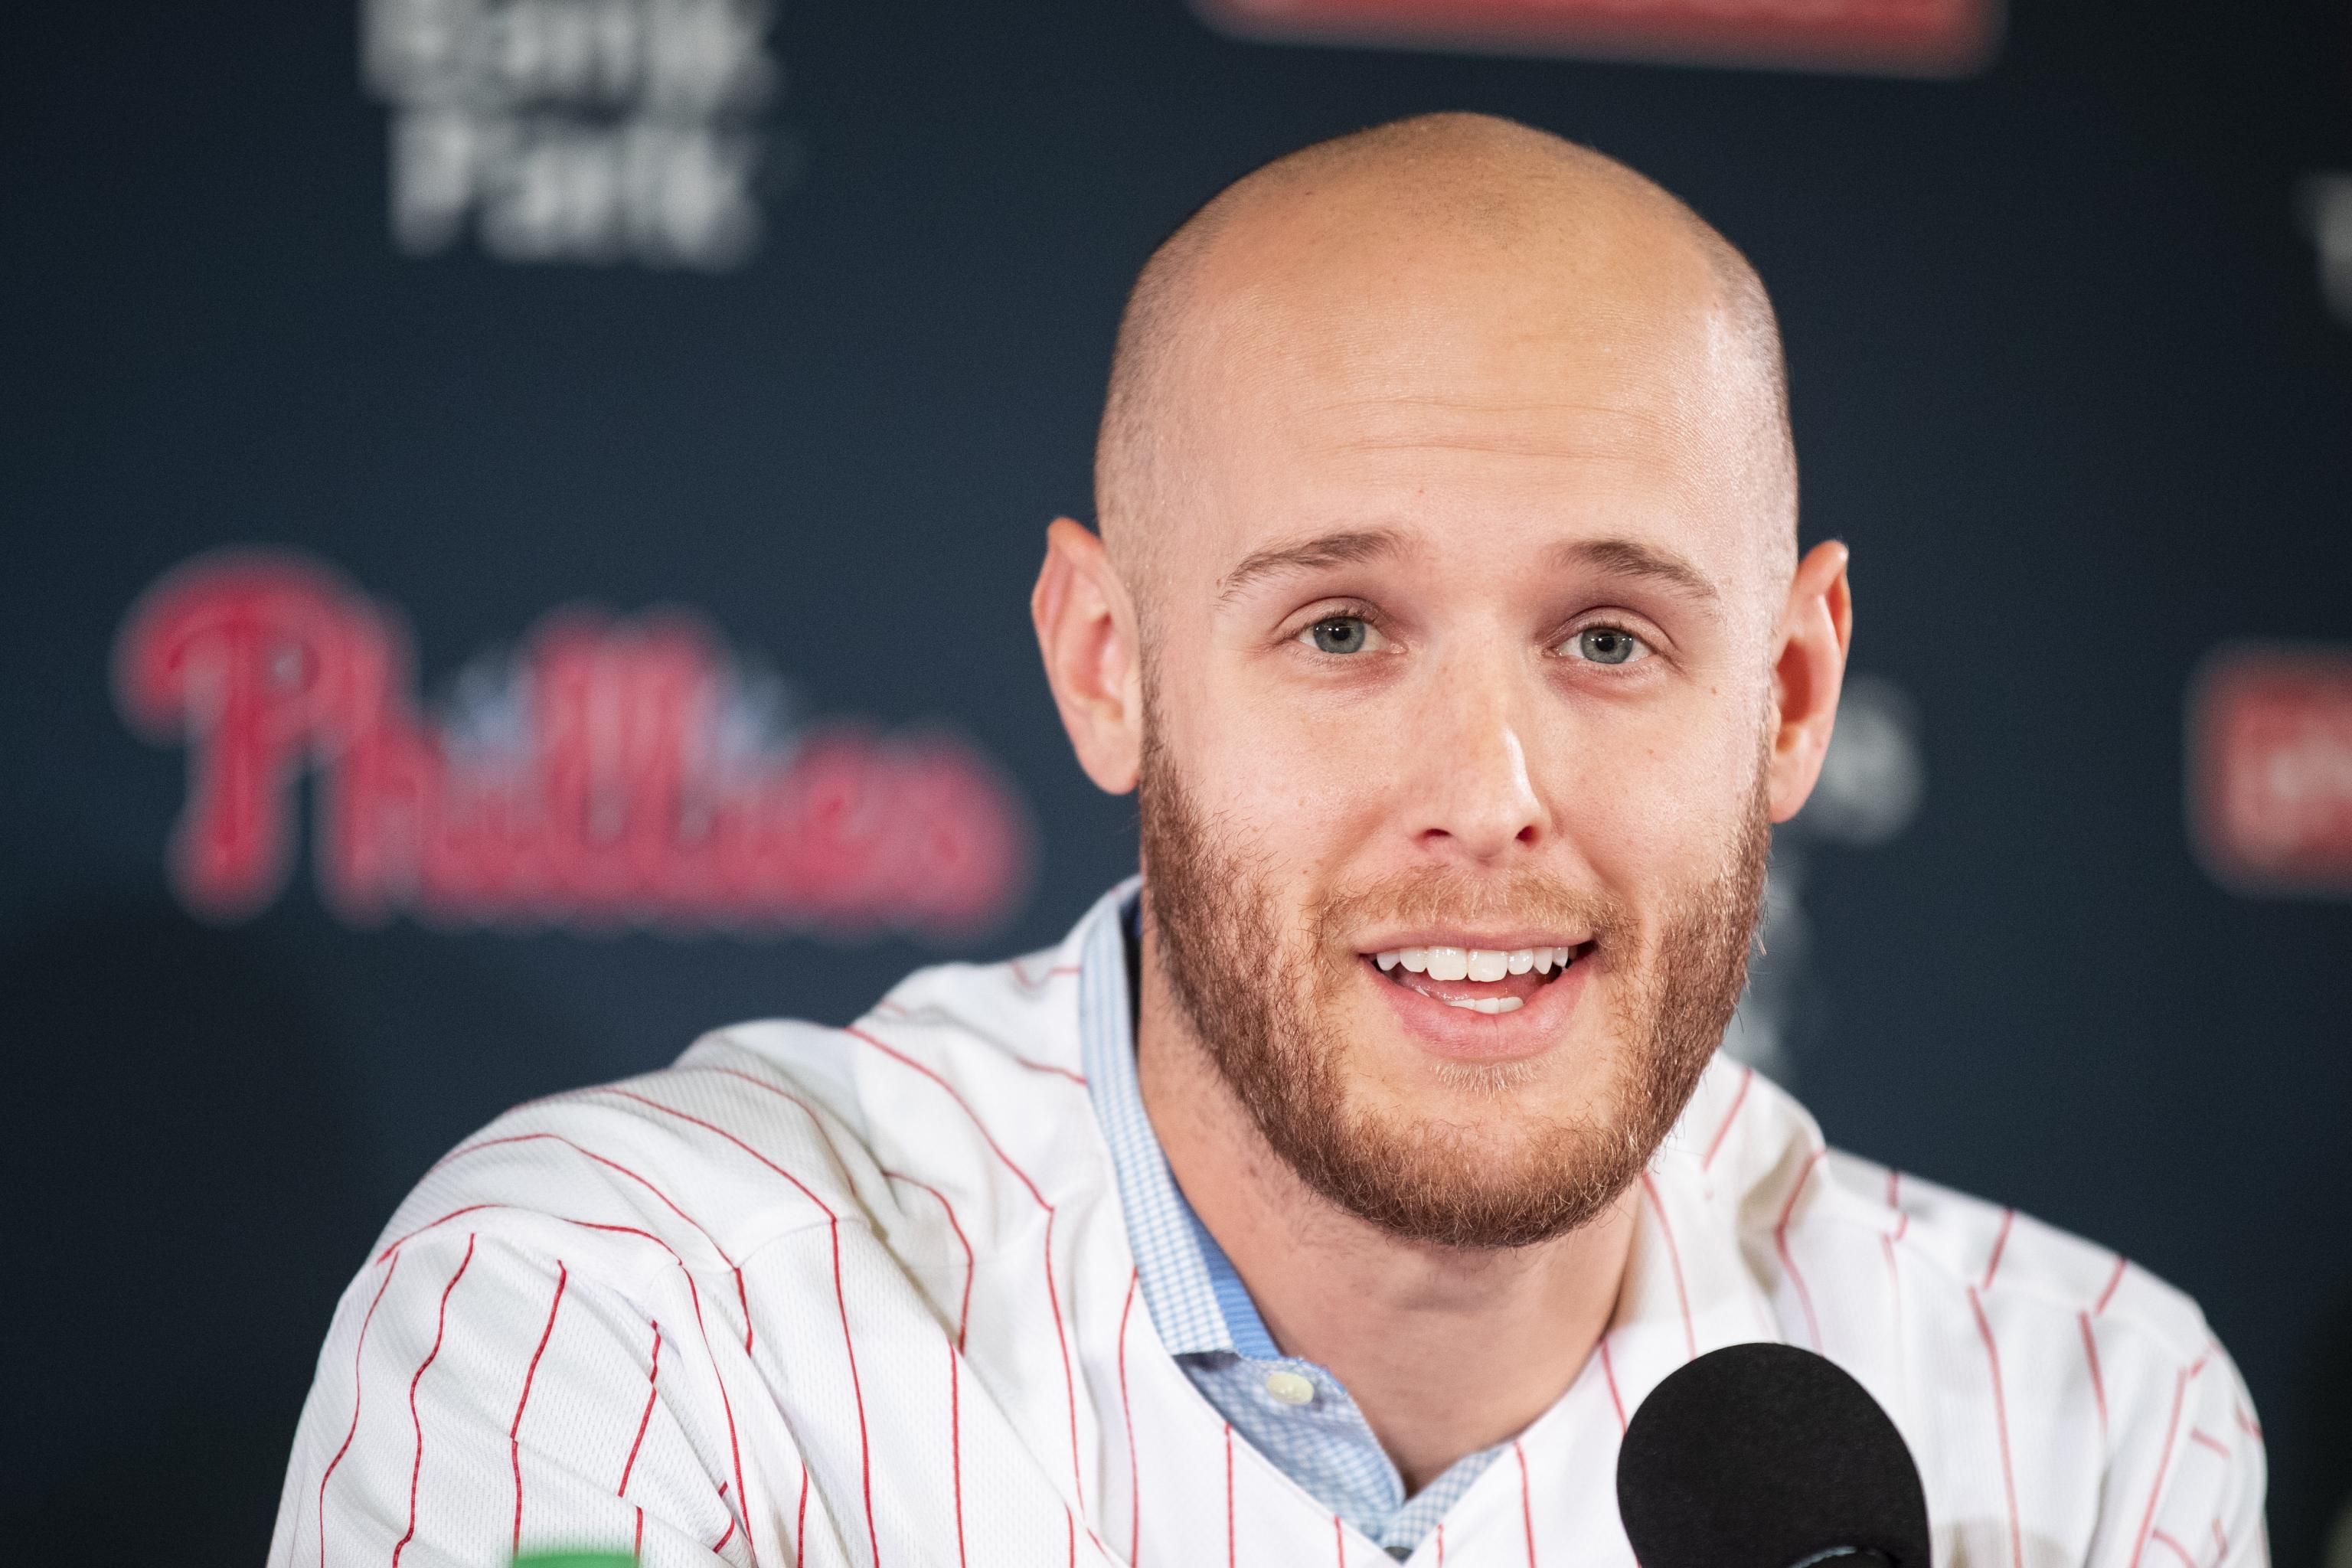 Phillies Zach Wheeler, wife announce pregnancy ahead of NLCS: 'Baby No. 3  has entered the game